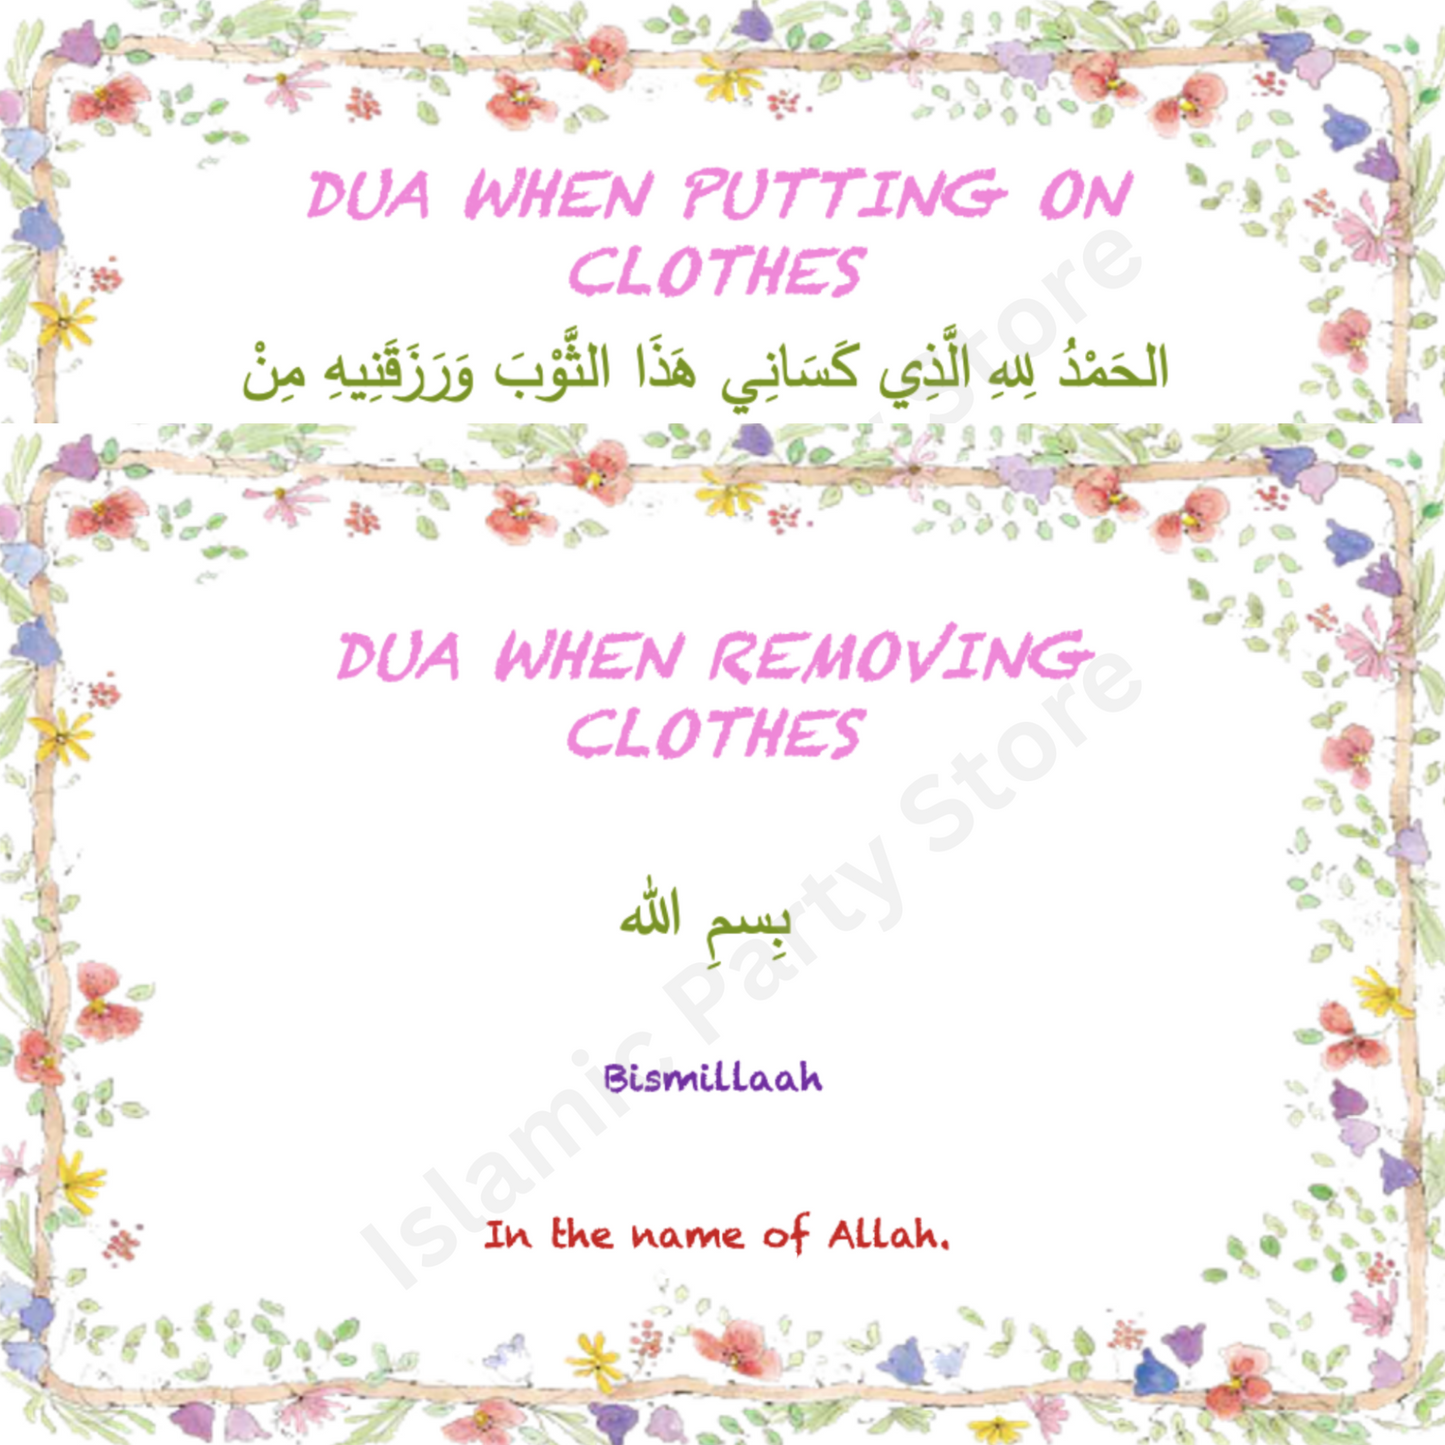 Dua for Putting on & Removing Clothes